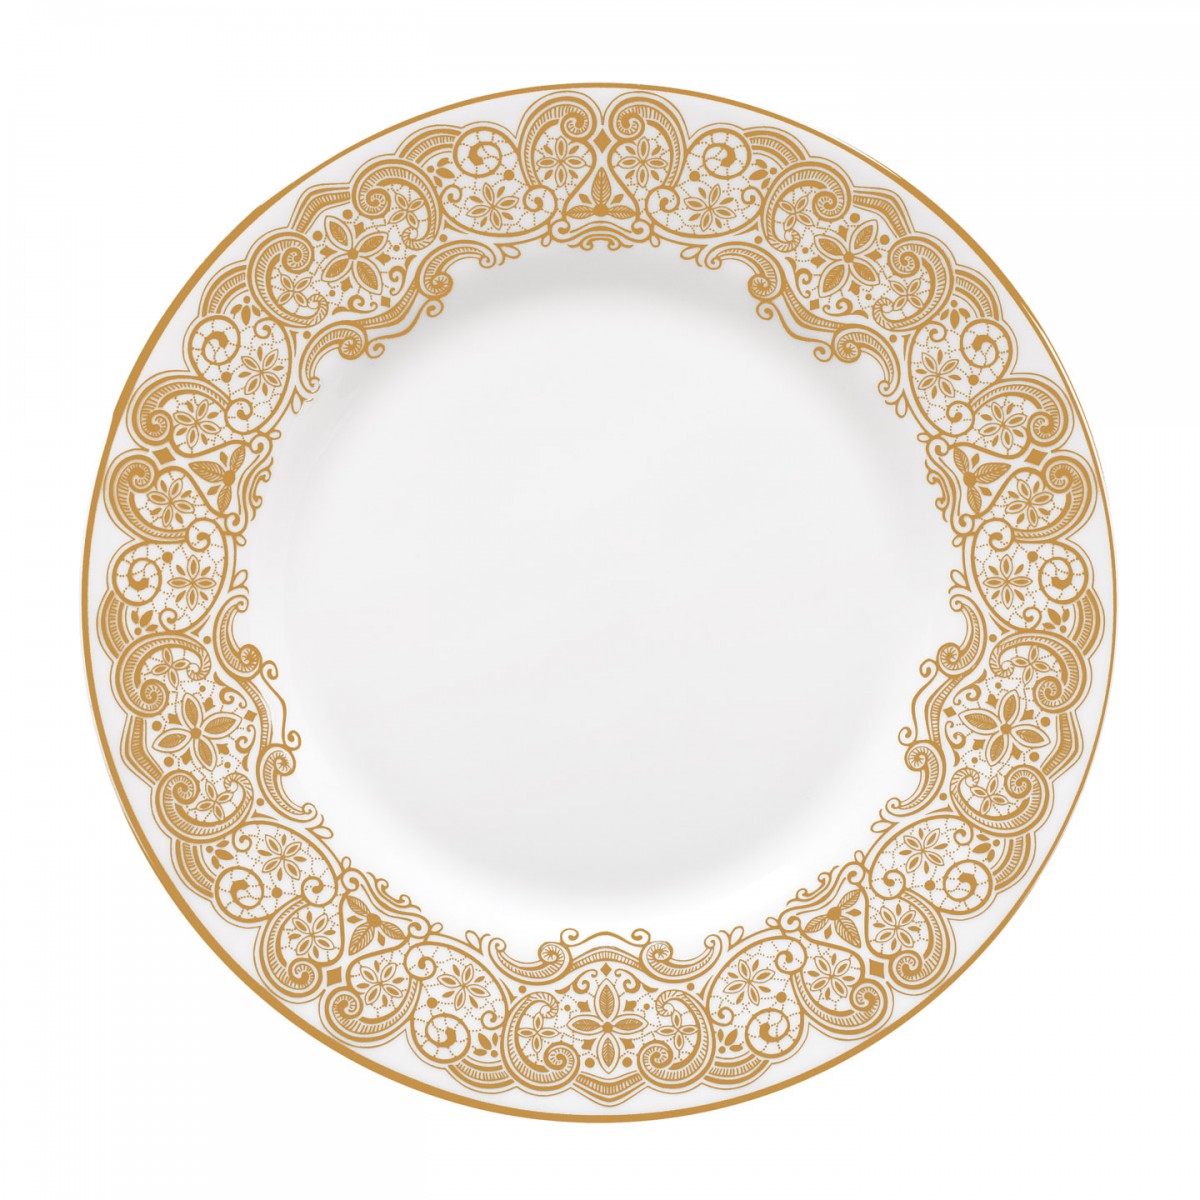 waterford-lismore-lace-gold-salad-plate-8-in.jpg